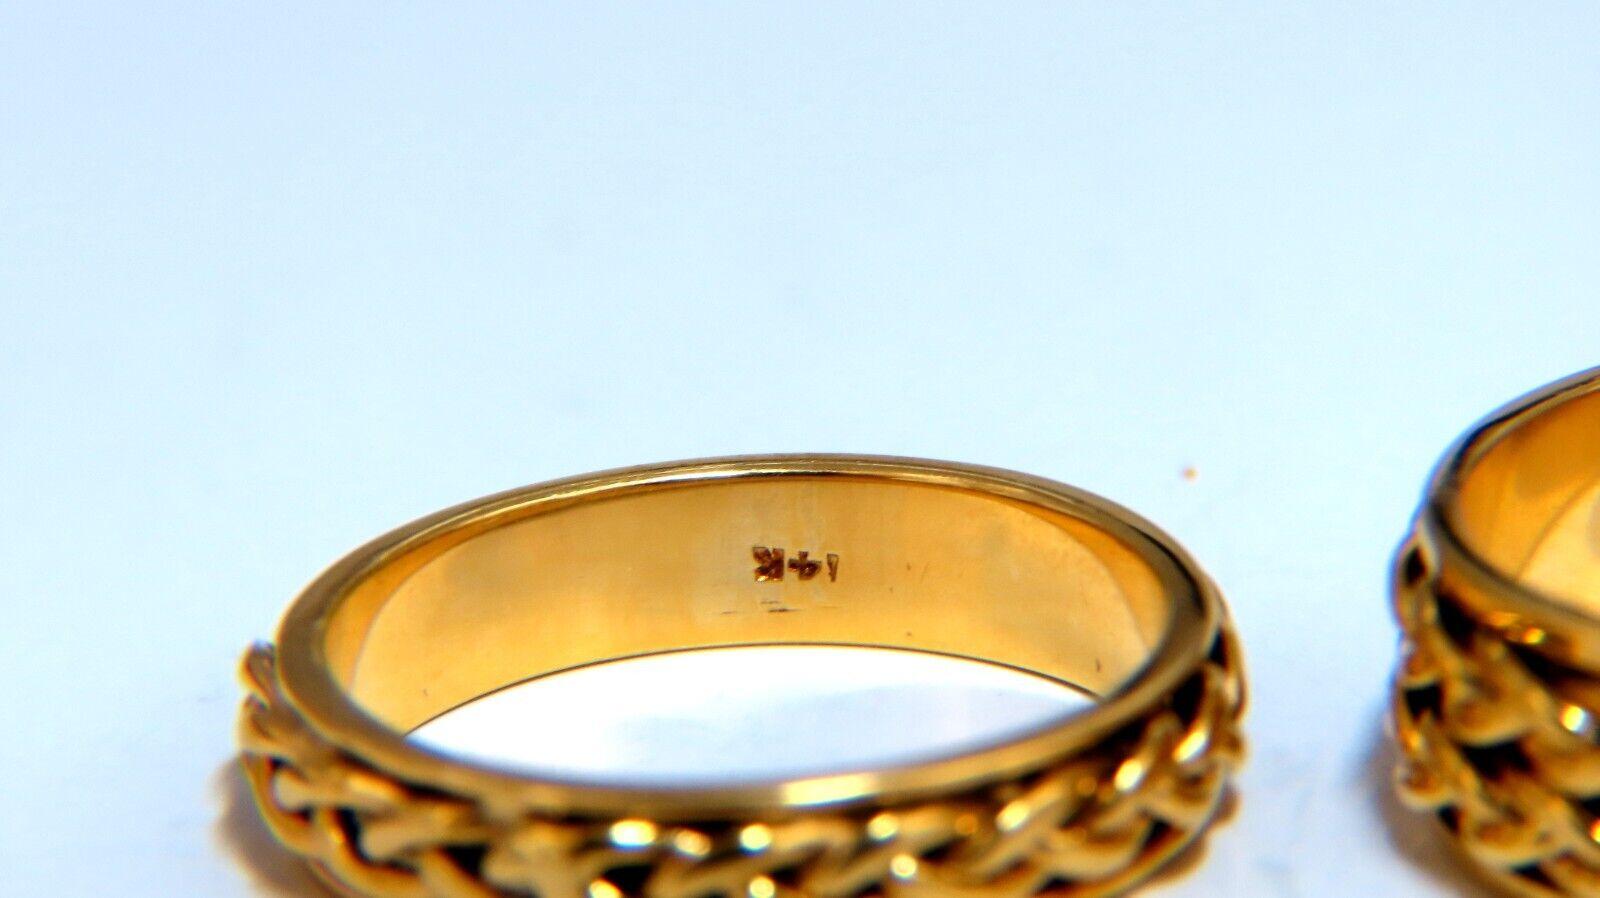 Matching Gold Bands

14kt Gold 

7.5 4.5mm 

Size: 9 9.25

We may not resize.

11; Grams. 

Depth: 2